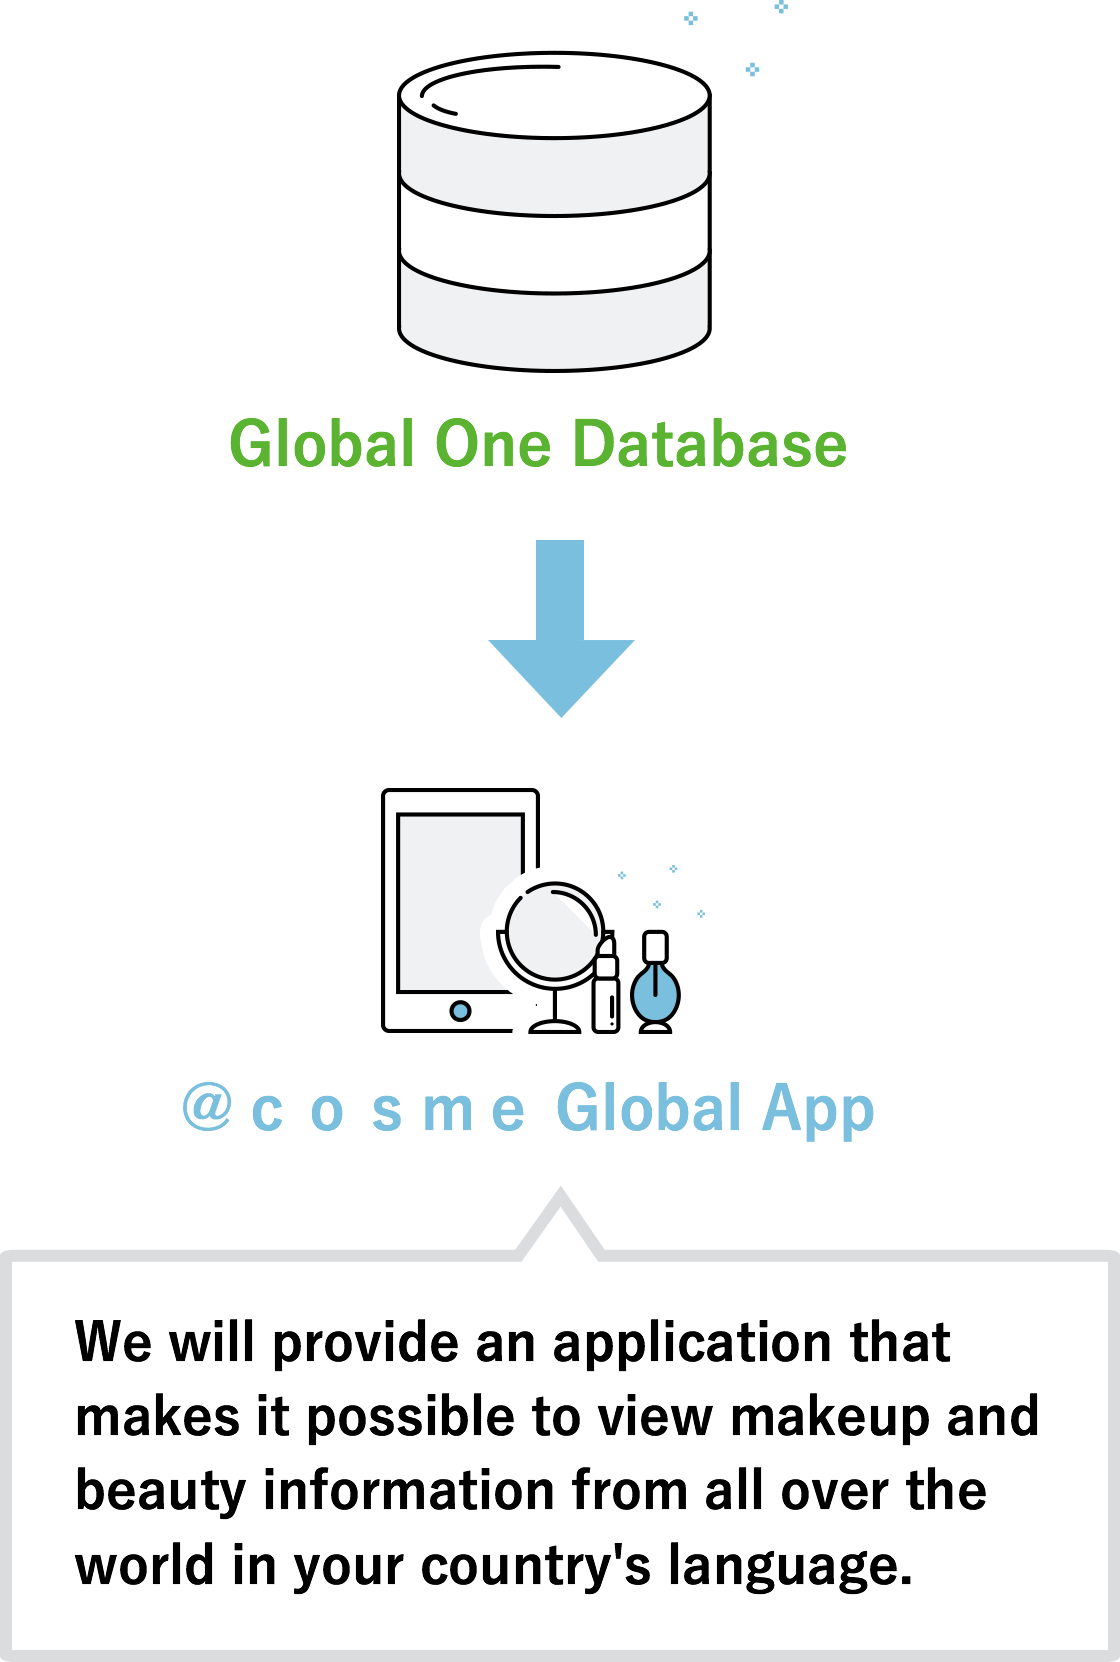 [Global One Database → @cosme Global App] We are developing a global app that would allow users around the world to use a single, unified ID to access @cosme content (global cosmetics reviews, beauty data, et cetera) in their language of choice.